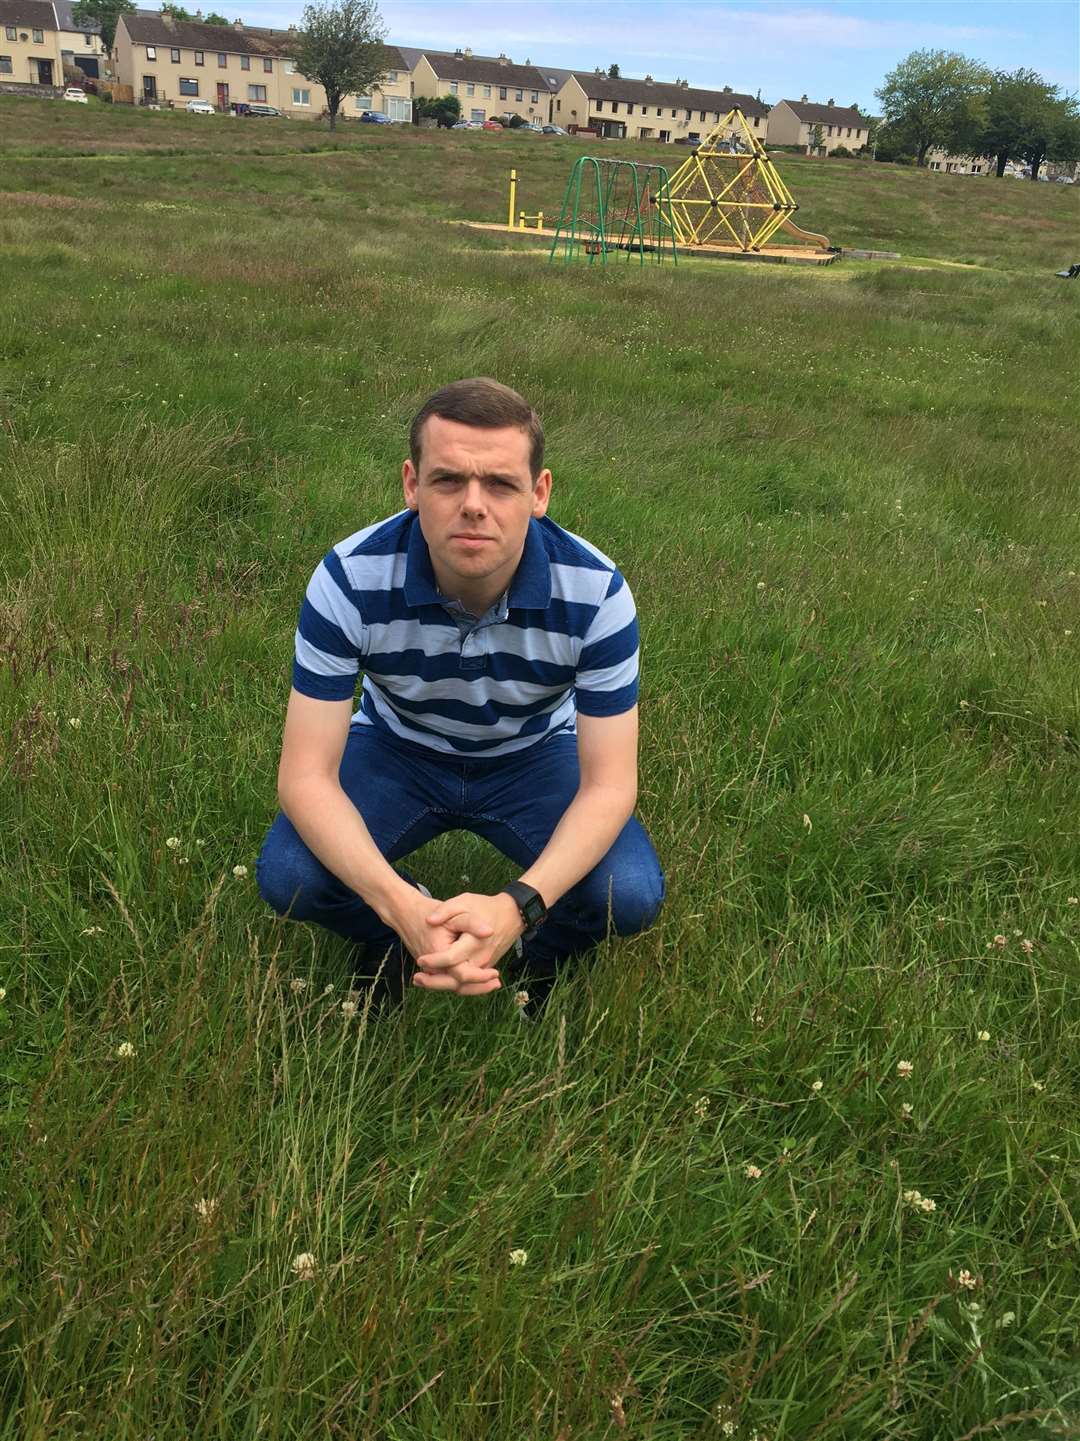 Douglas Ross MP is asking Moray Council to loan its grass cutting equipment to community groups.